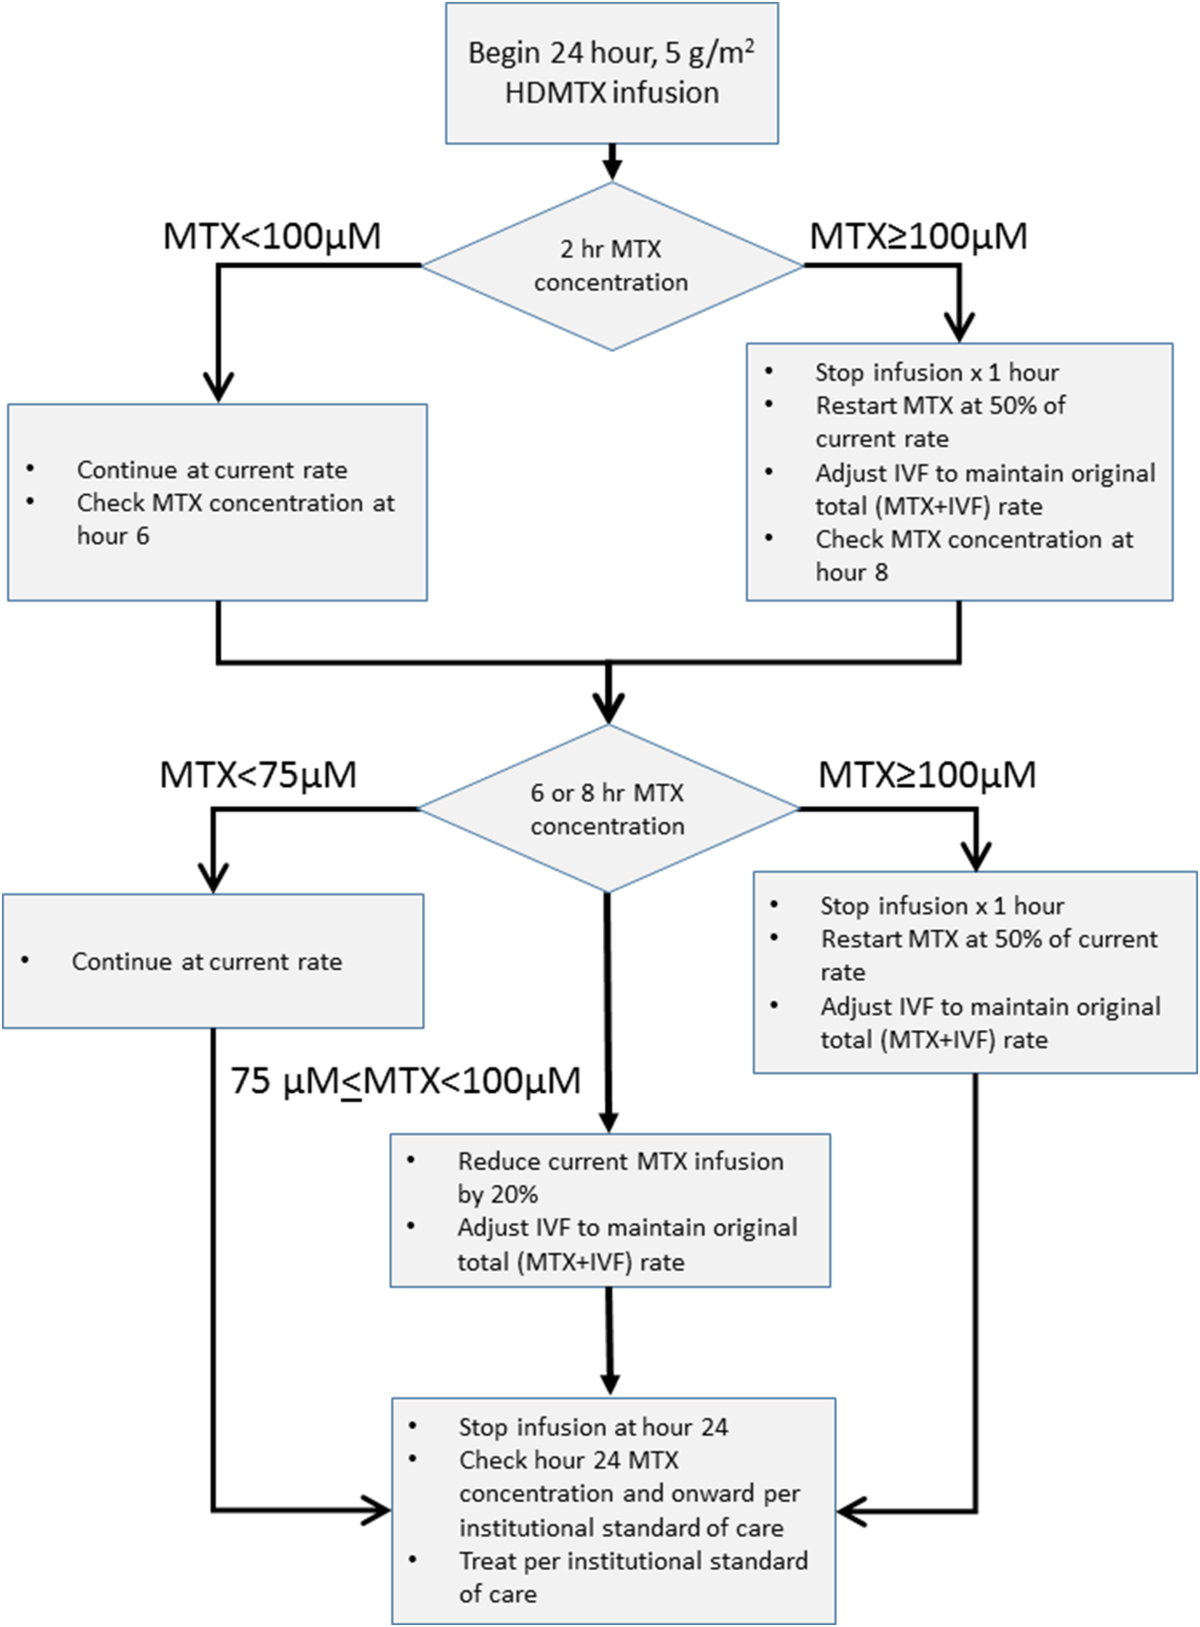 A prospective study of a simple algorithm to individually dose high-dose  methotrexate for children with leukemia at risk for methotrexate toxicities  | Cancer Chemotherapy and Pharmacology